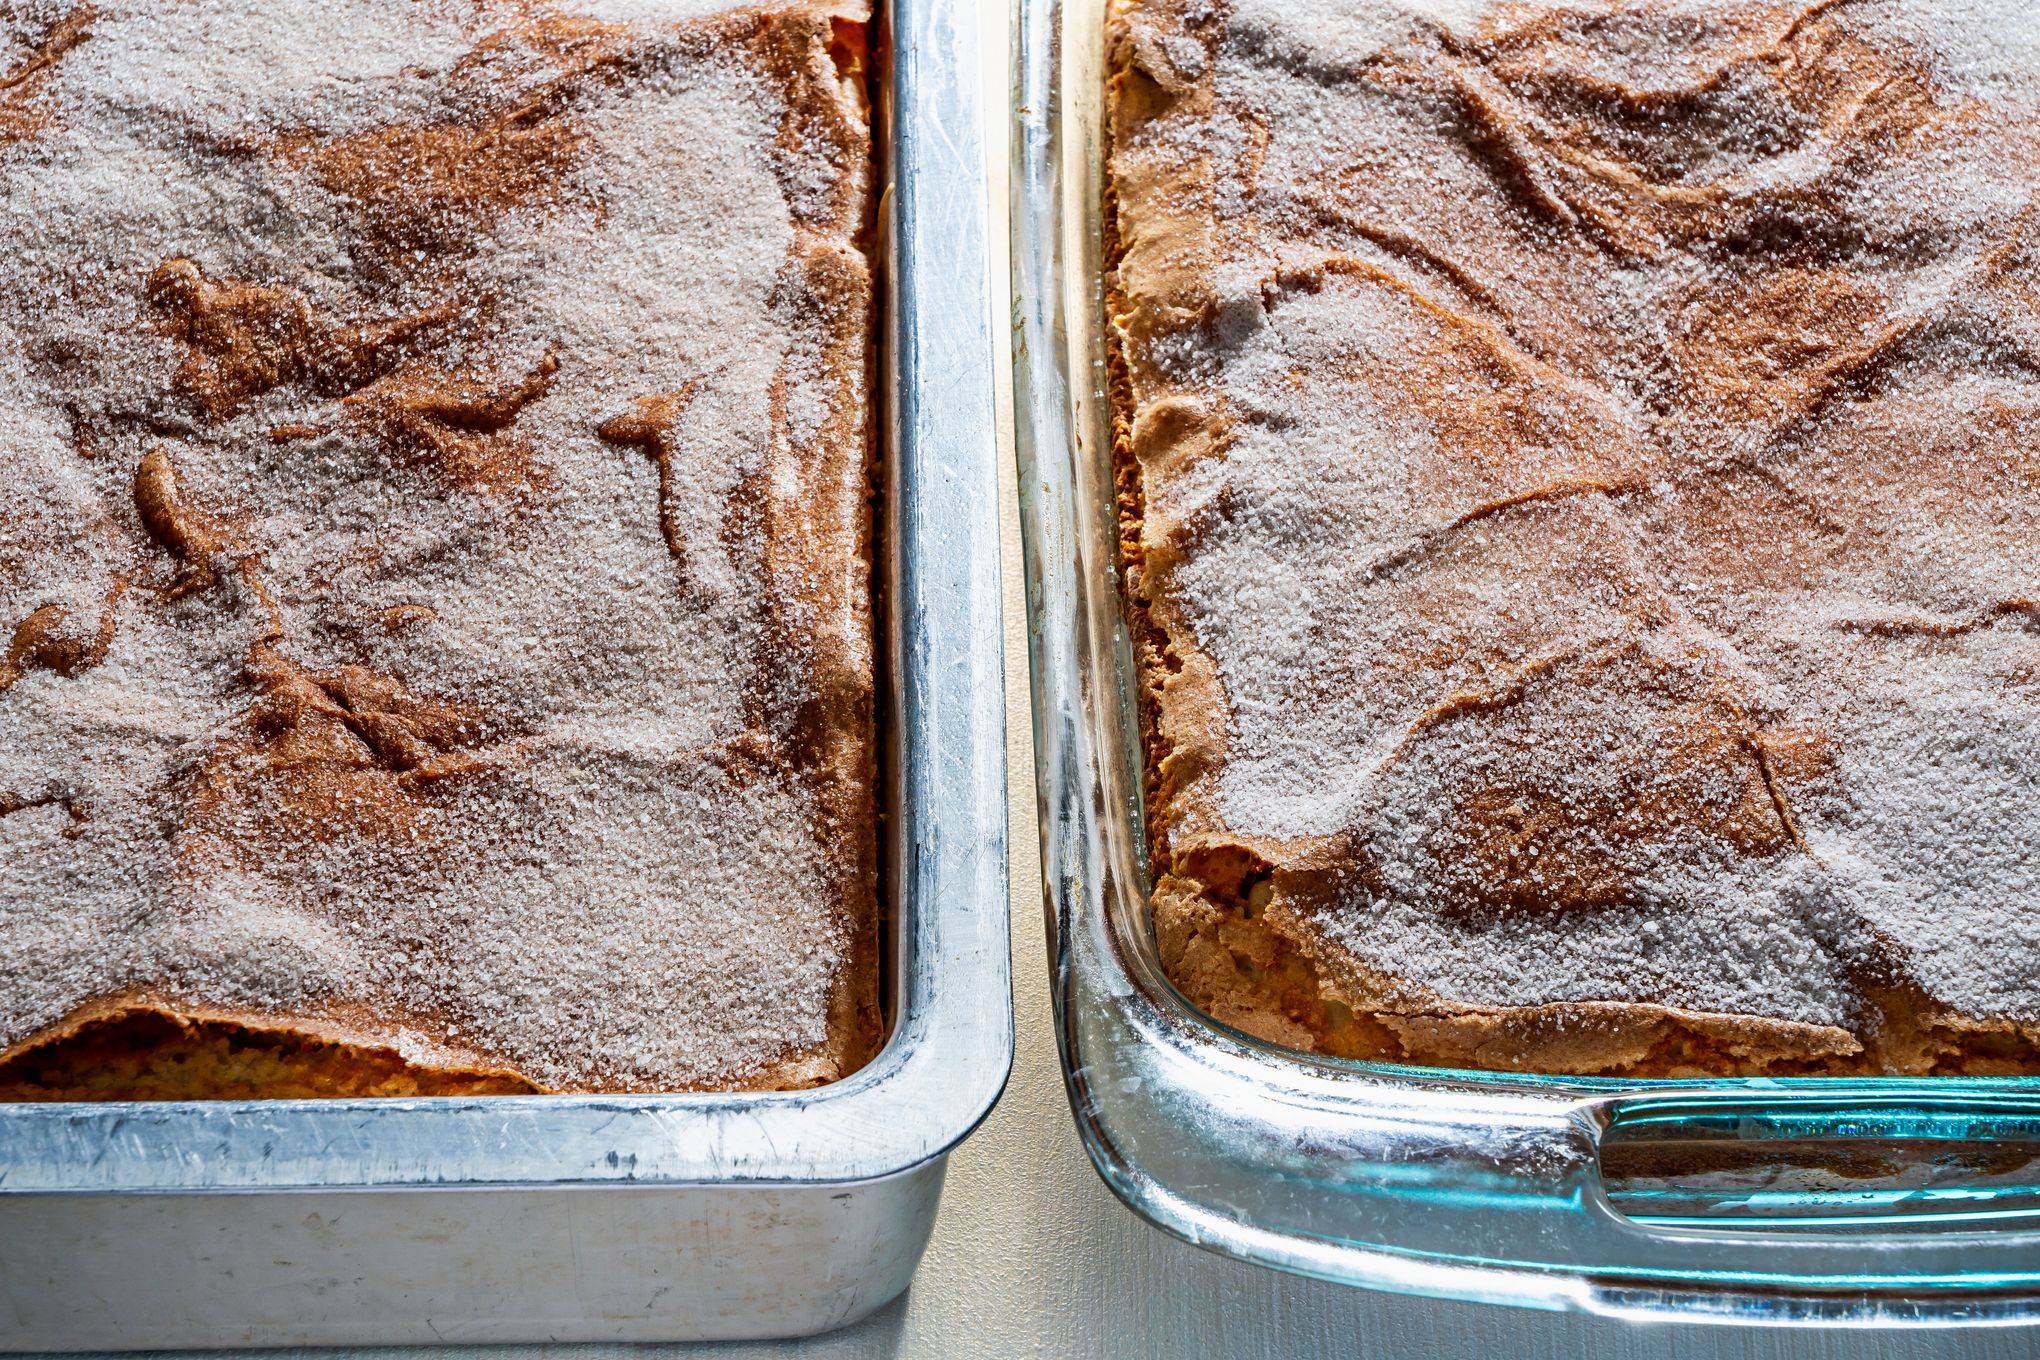 Metal or glass for baking? Let's clear a few things up.